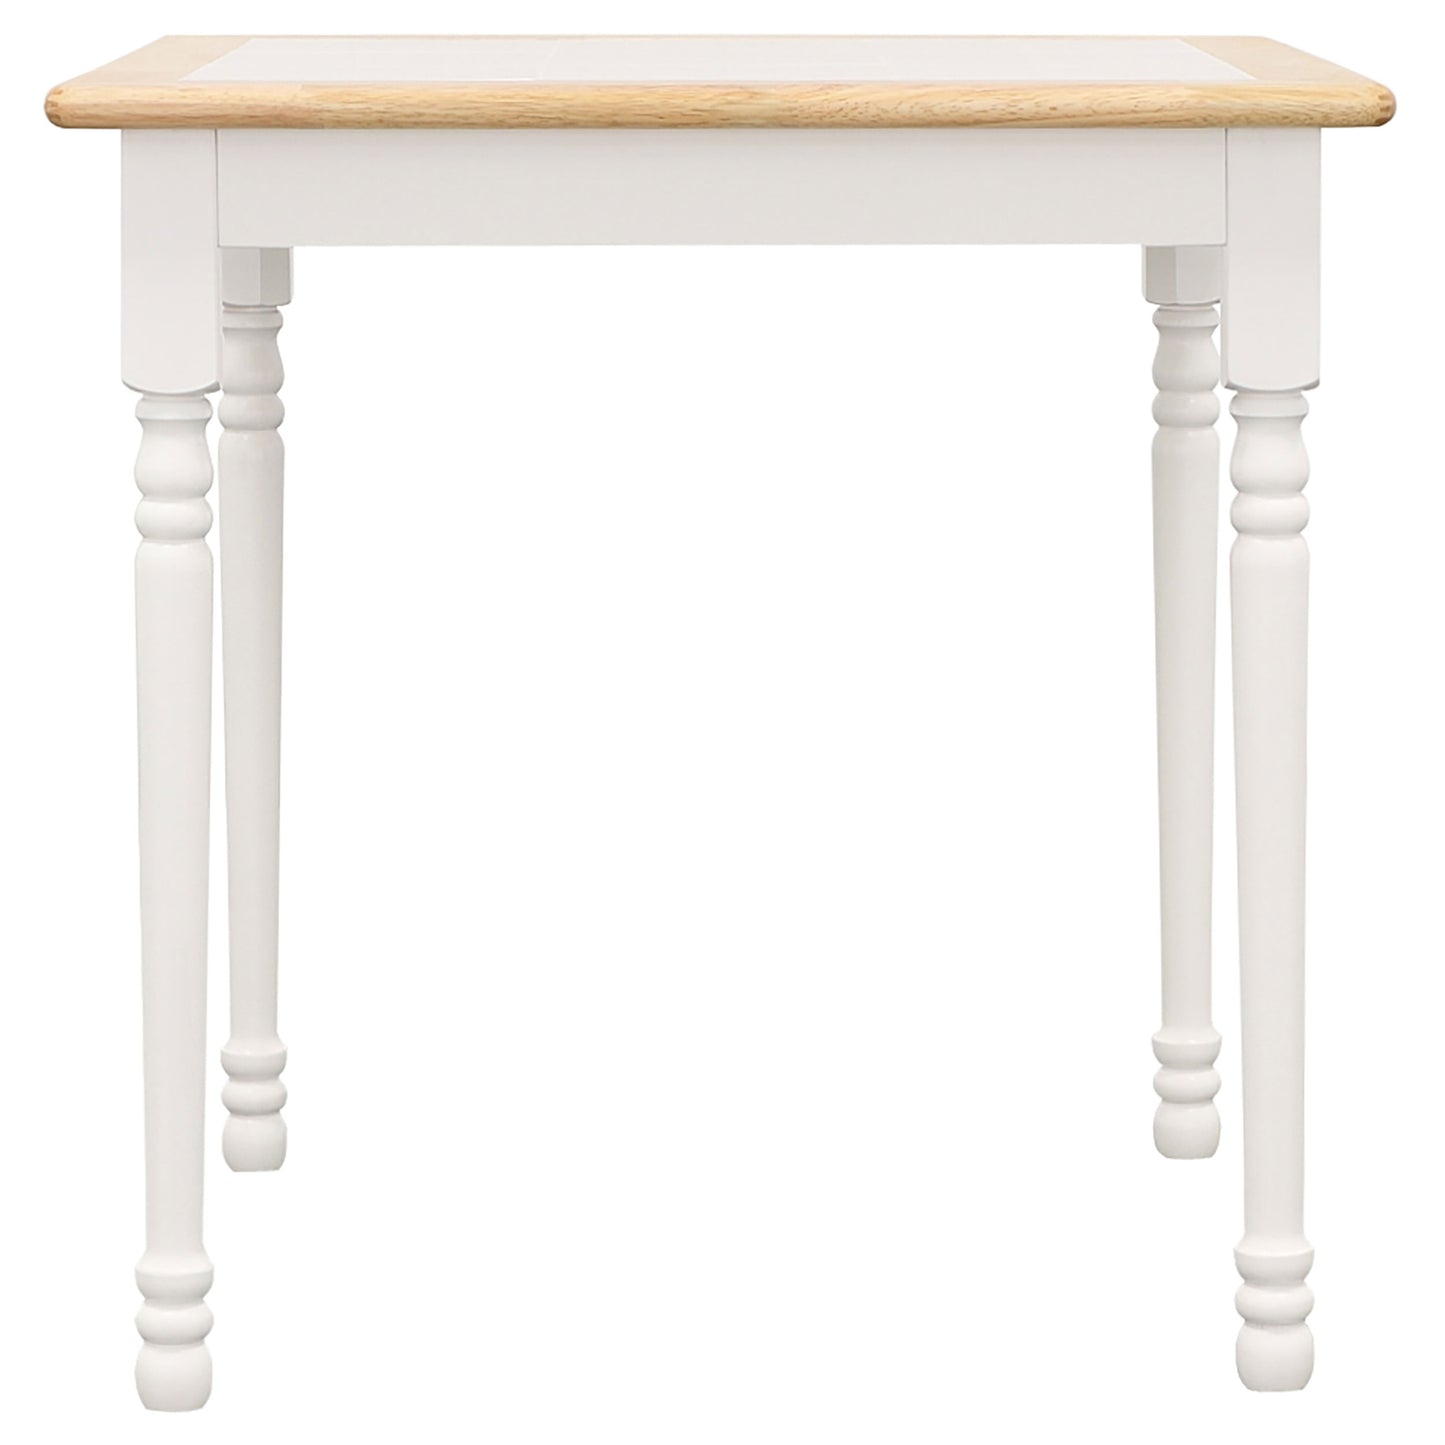 Carlene Square Top Dining Table Natural Brown and White